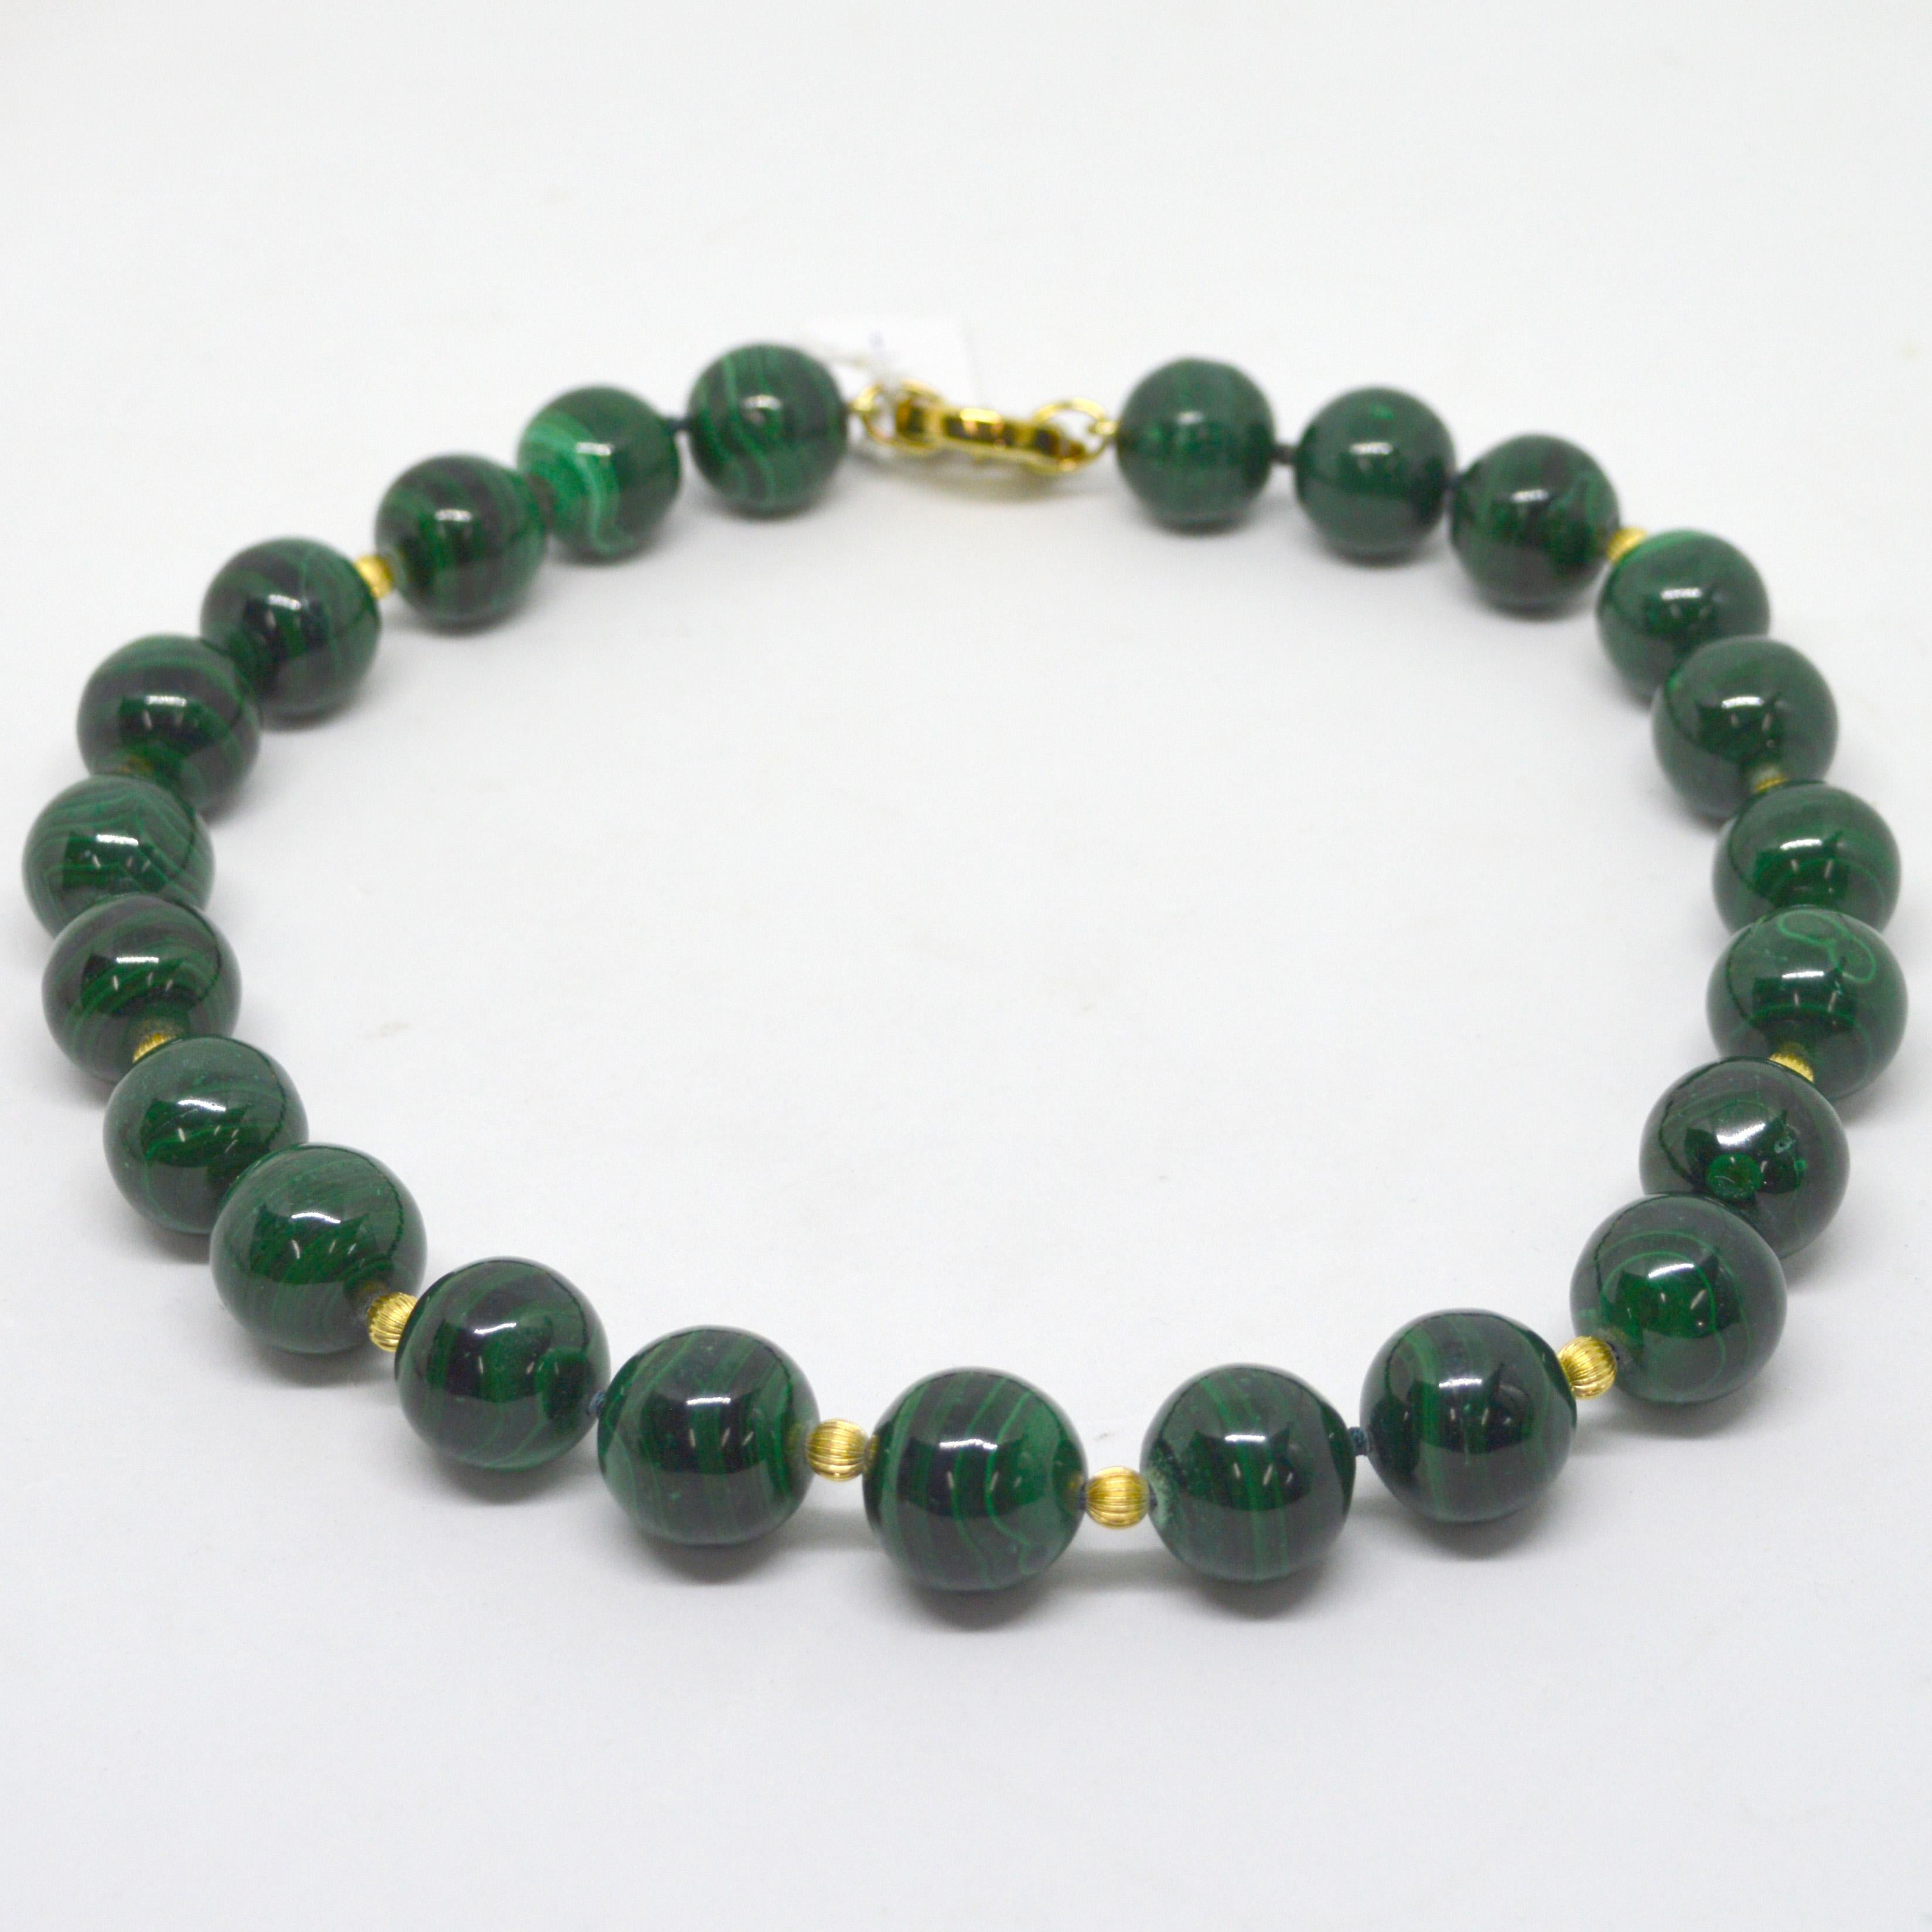 Large 18mm high polished round Malachite spheres with 5mm Corrugated 14k Gold filled beads and a 18mm Gold plate Sterling silver bolt clasp.
Necklace features 23 high polished 18mm natural Malachite beads

Malachite has banding of light and dark